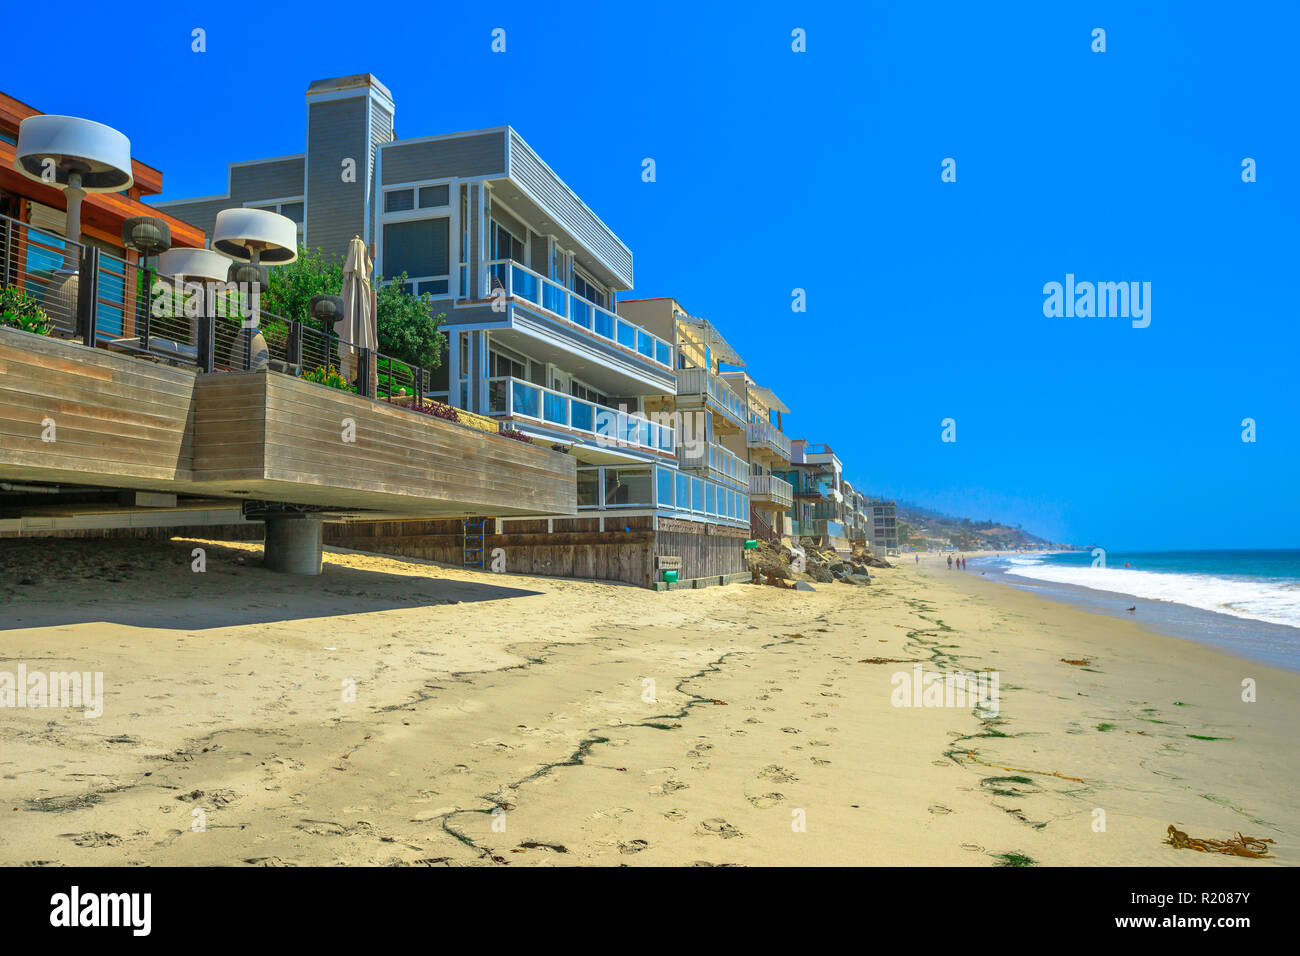 California West Coast. Malibu beach houses on popular Carbon Beach also called Billionaire Beach for the many houses of famous people. Malibu shoreline landscape in a summers sunny day. Stock Photo